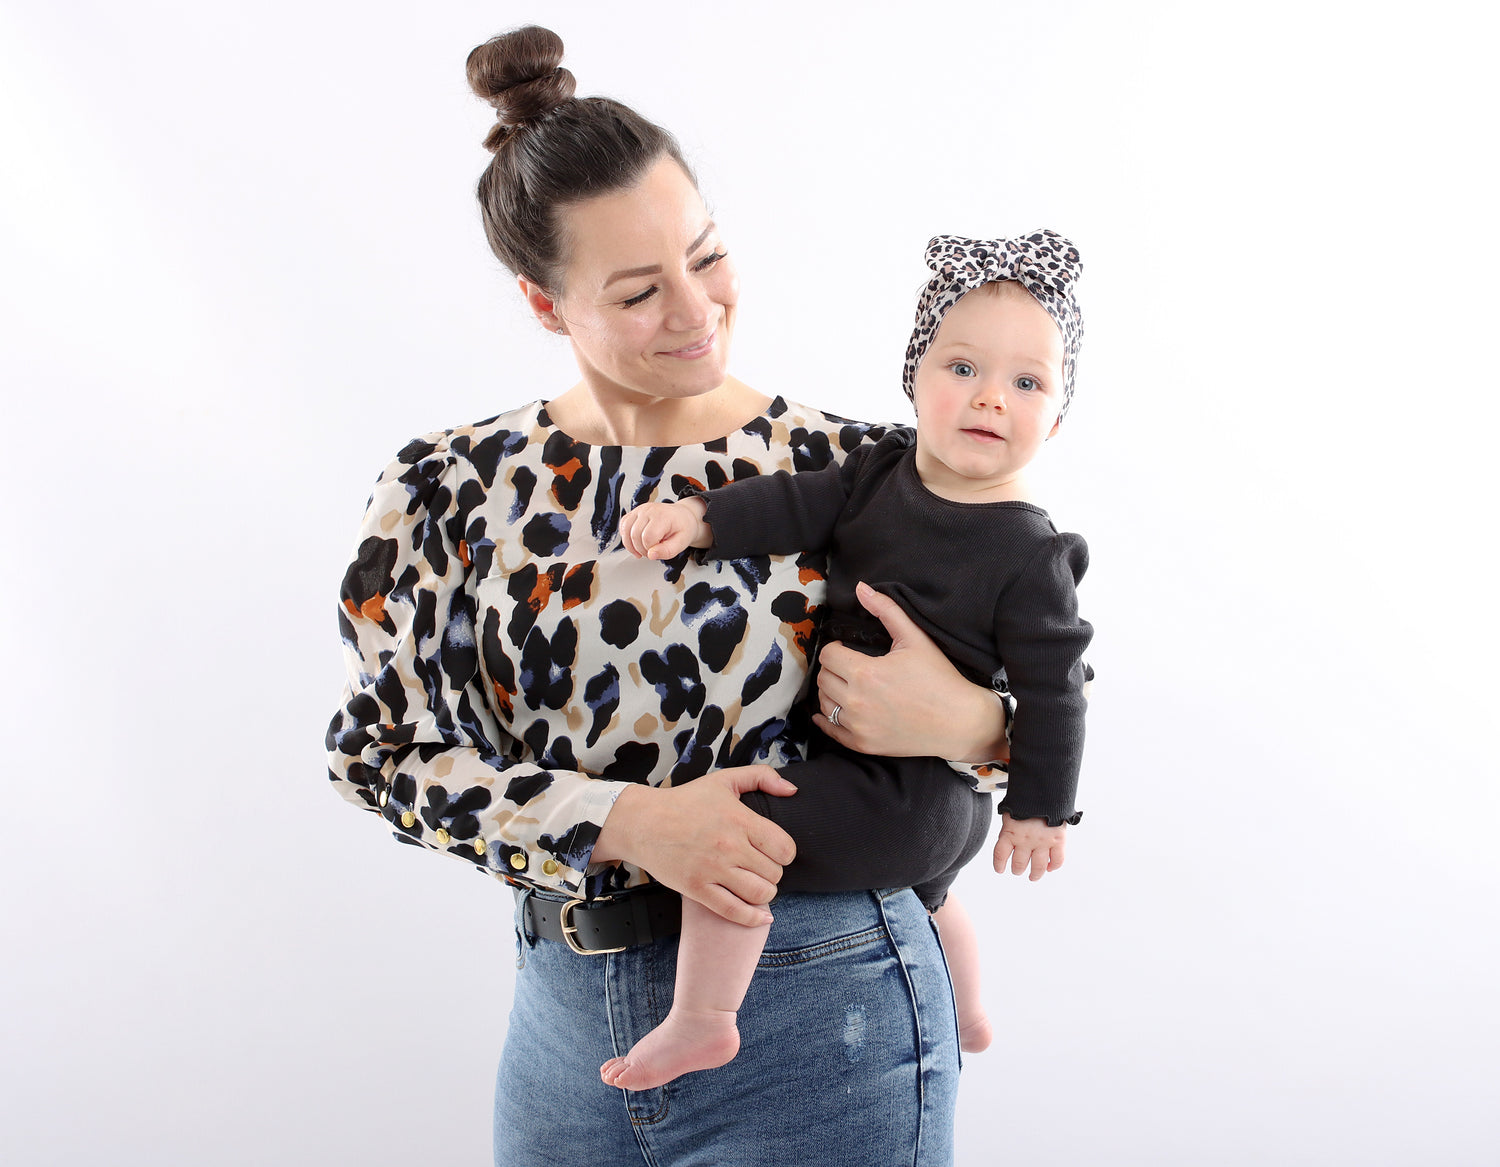 Breastfeeding mum wearing a stylish leopard print breastfeeding top with zips for discreet and easy nursing access. Fashionable top on Mum allows her to breastfeed in style. Mum looking at breastfed baby, breastfeeding blouse looks gorgeous on her. 